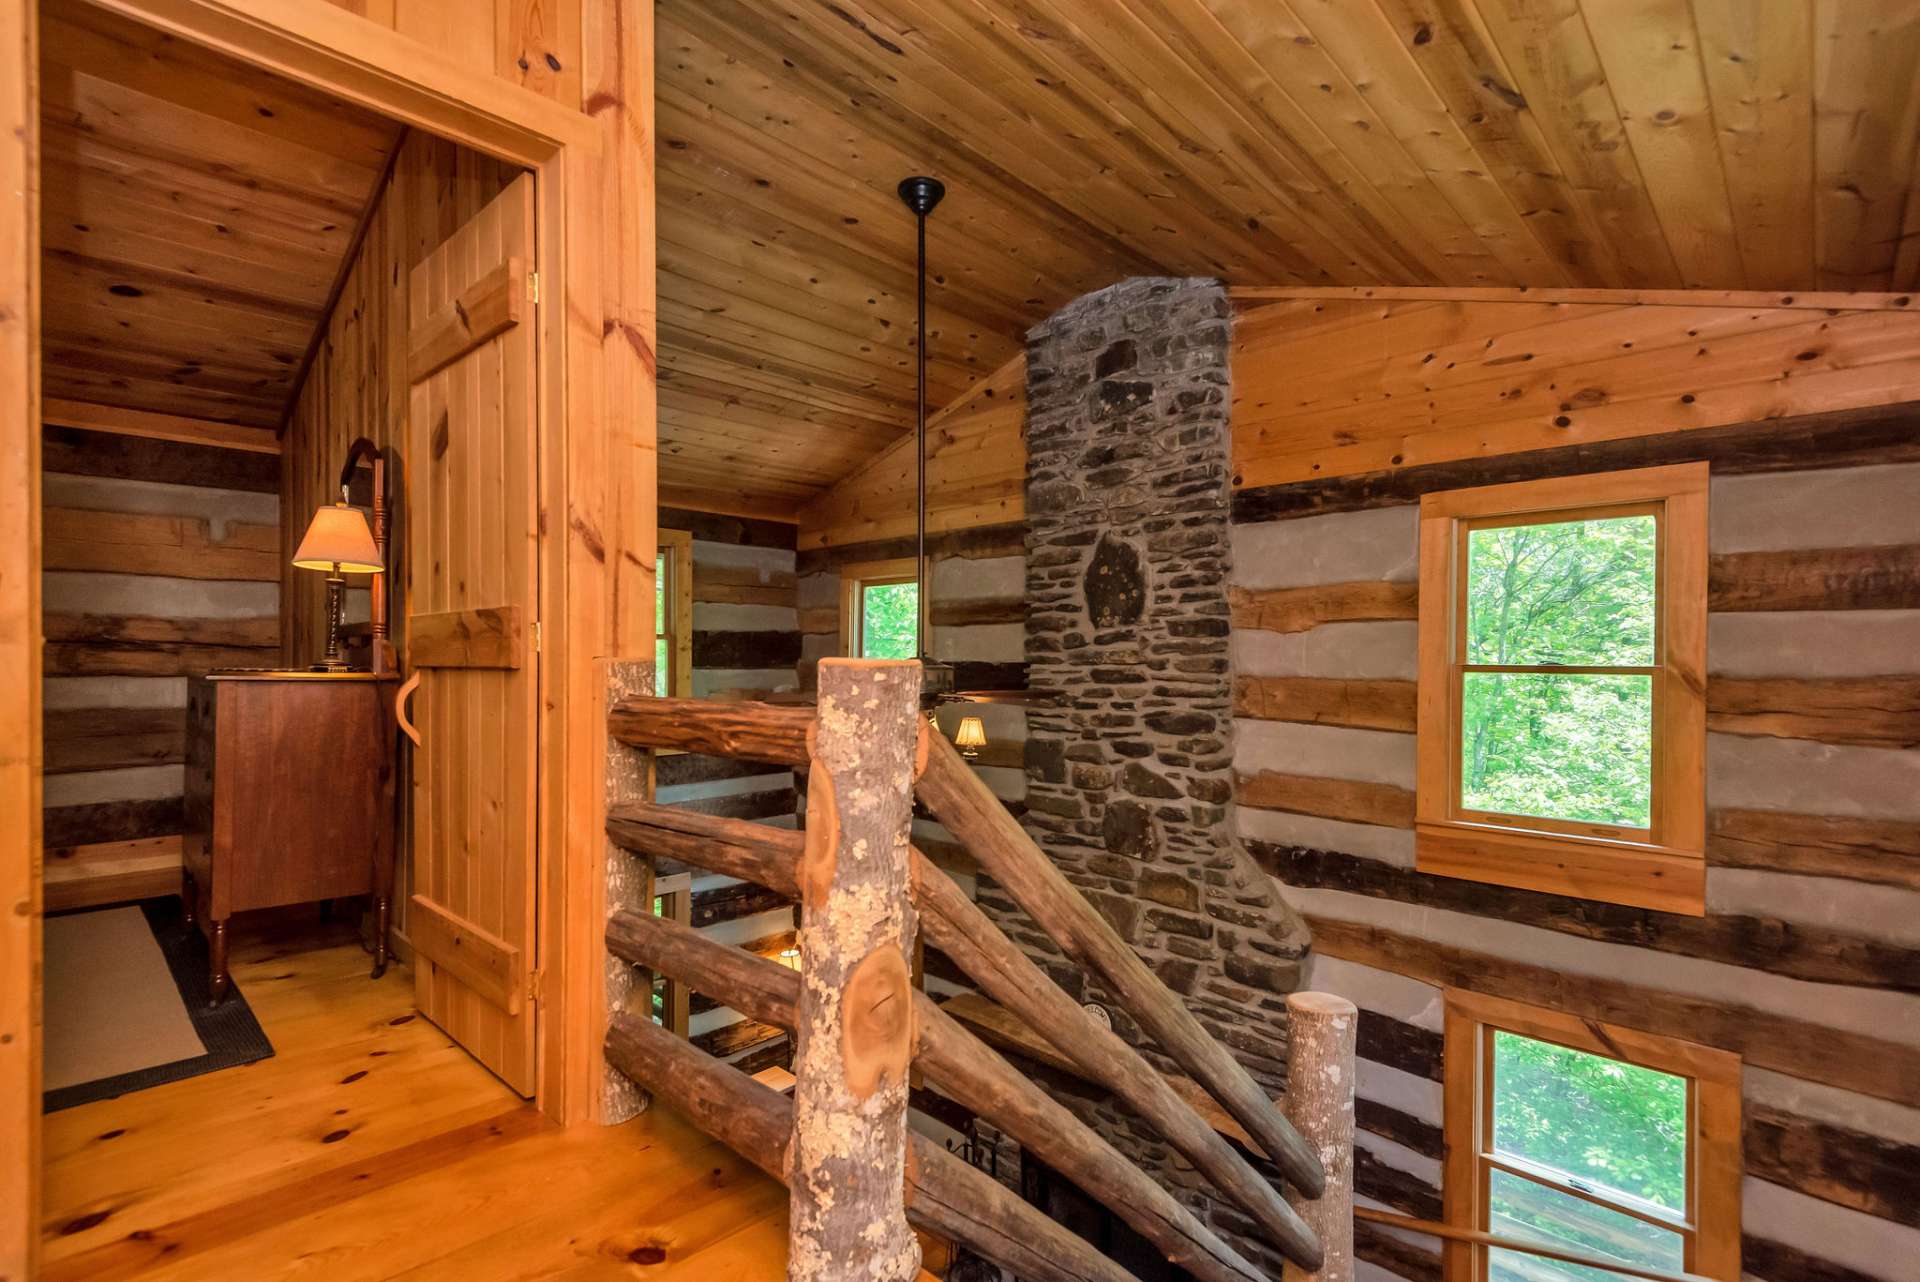 Rustic details adorn every angle of the home.